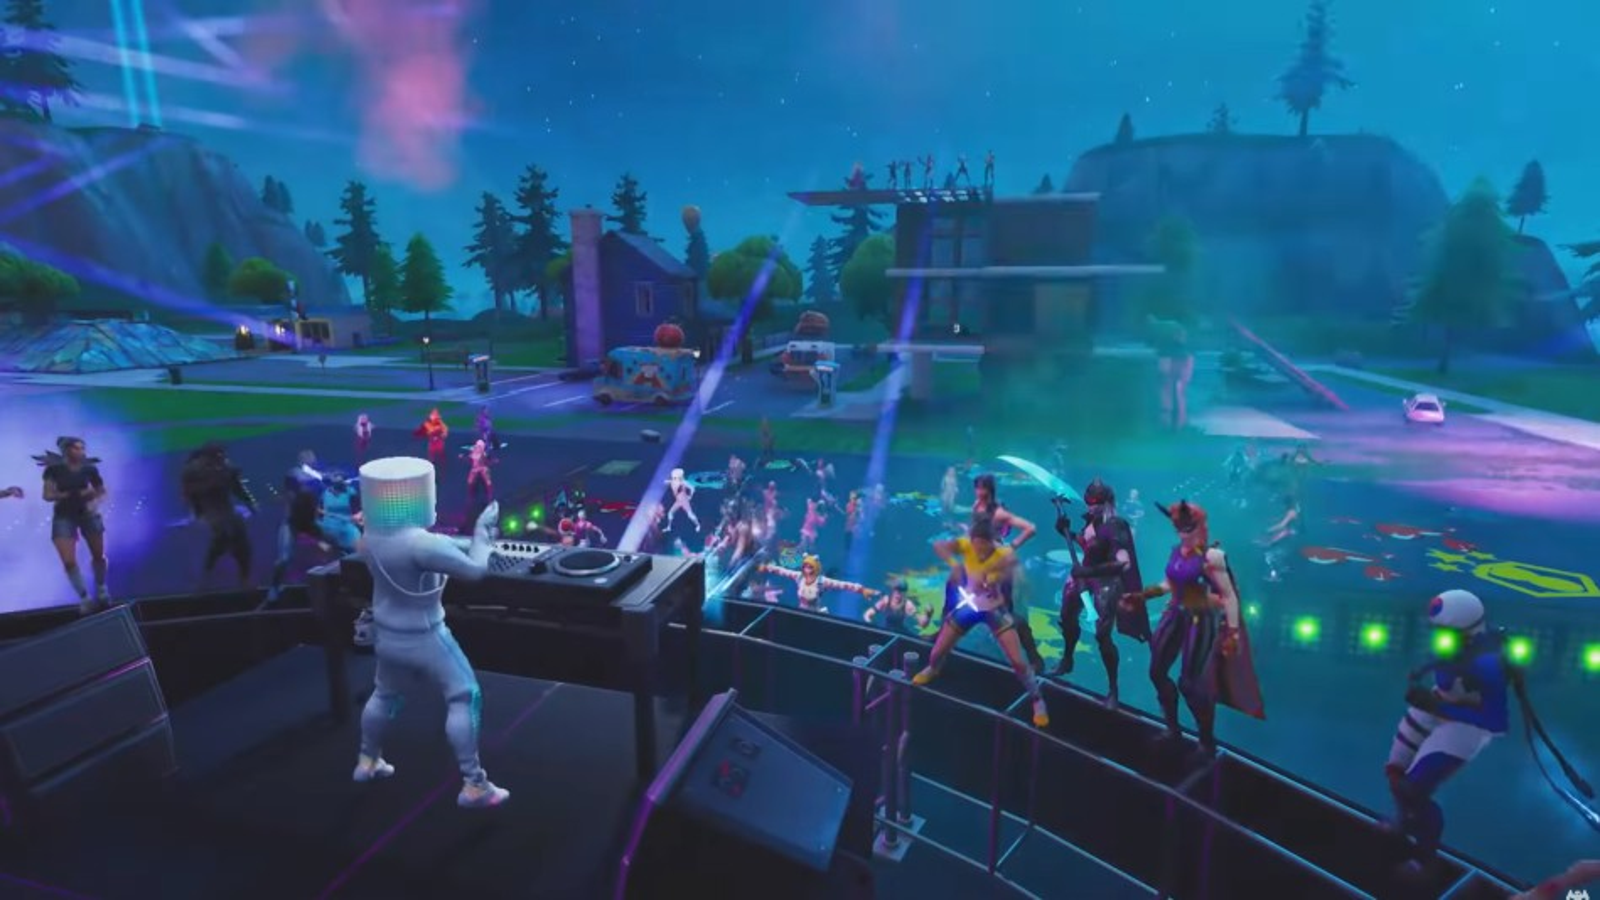 Creator of Fortnite Epic Games Acquires Bandcamp - mxdwn Games